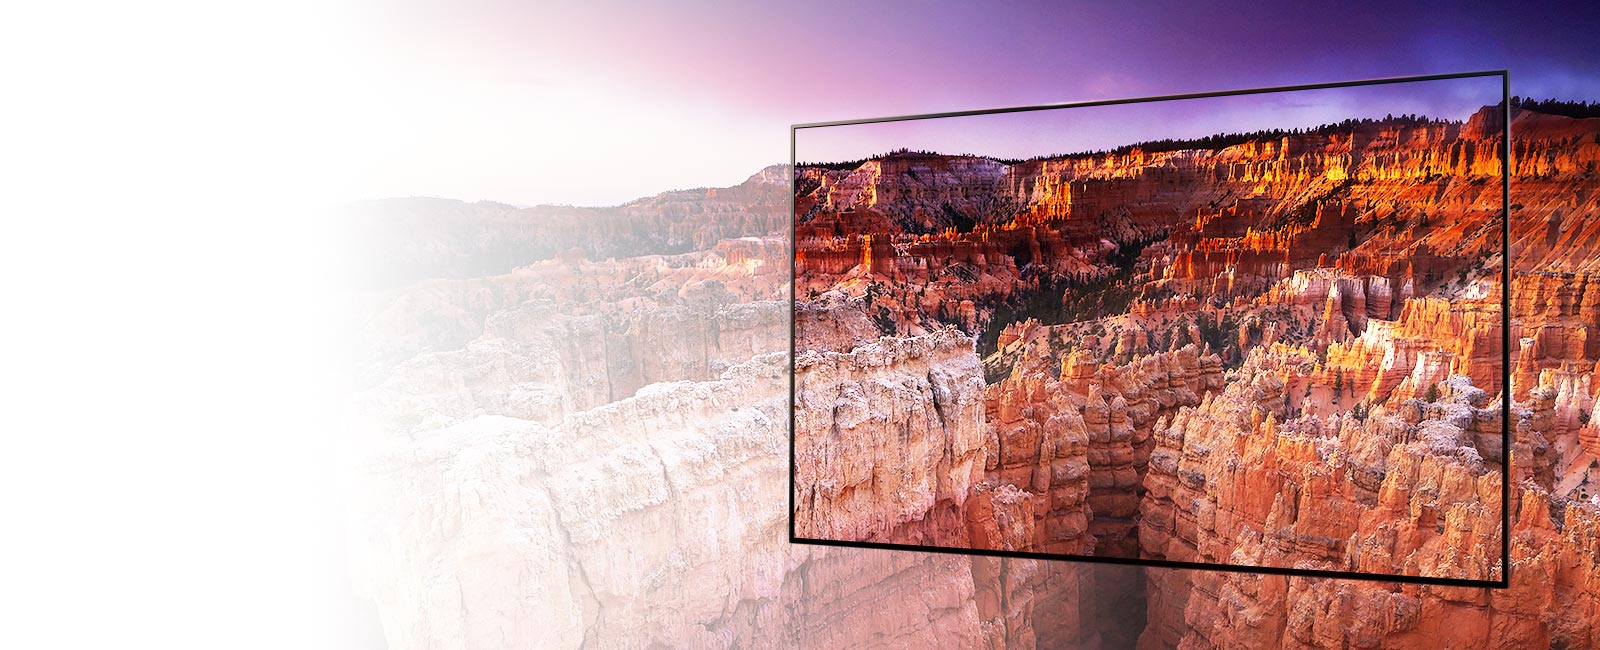 Find out more about LG OLED reliability